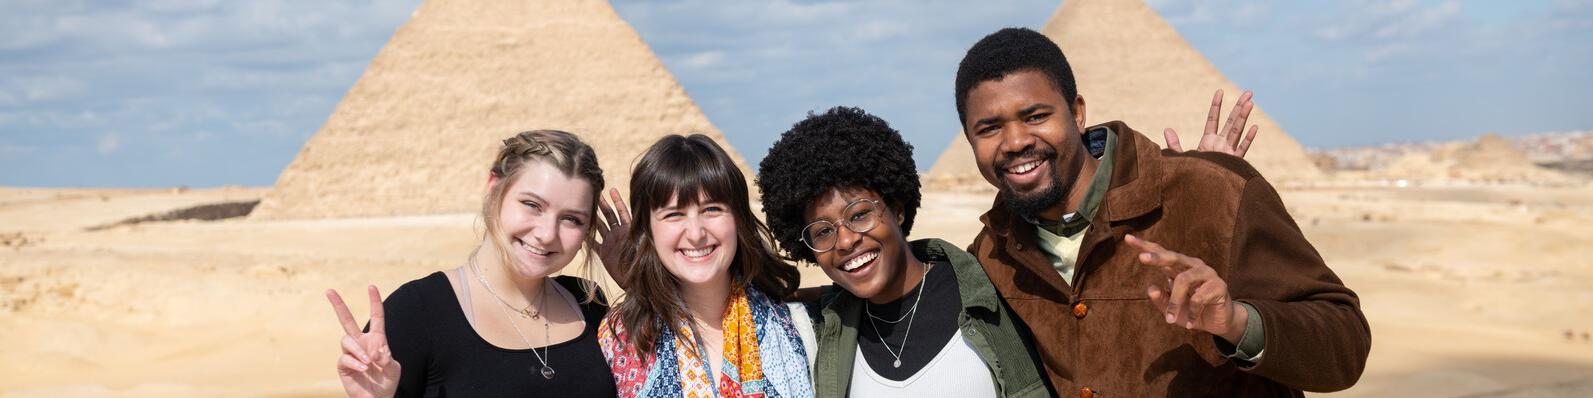 students_in_pyramids